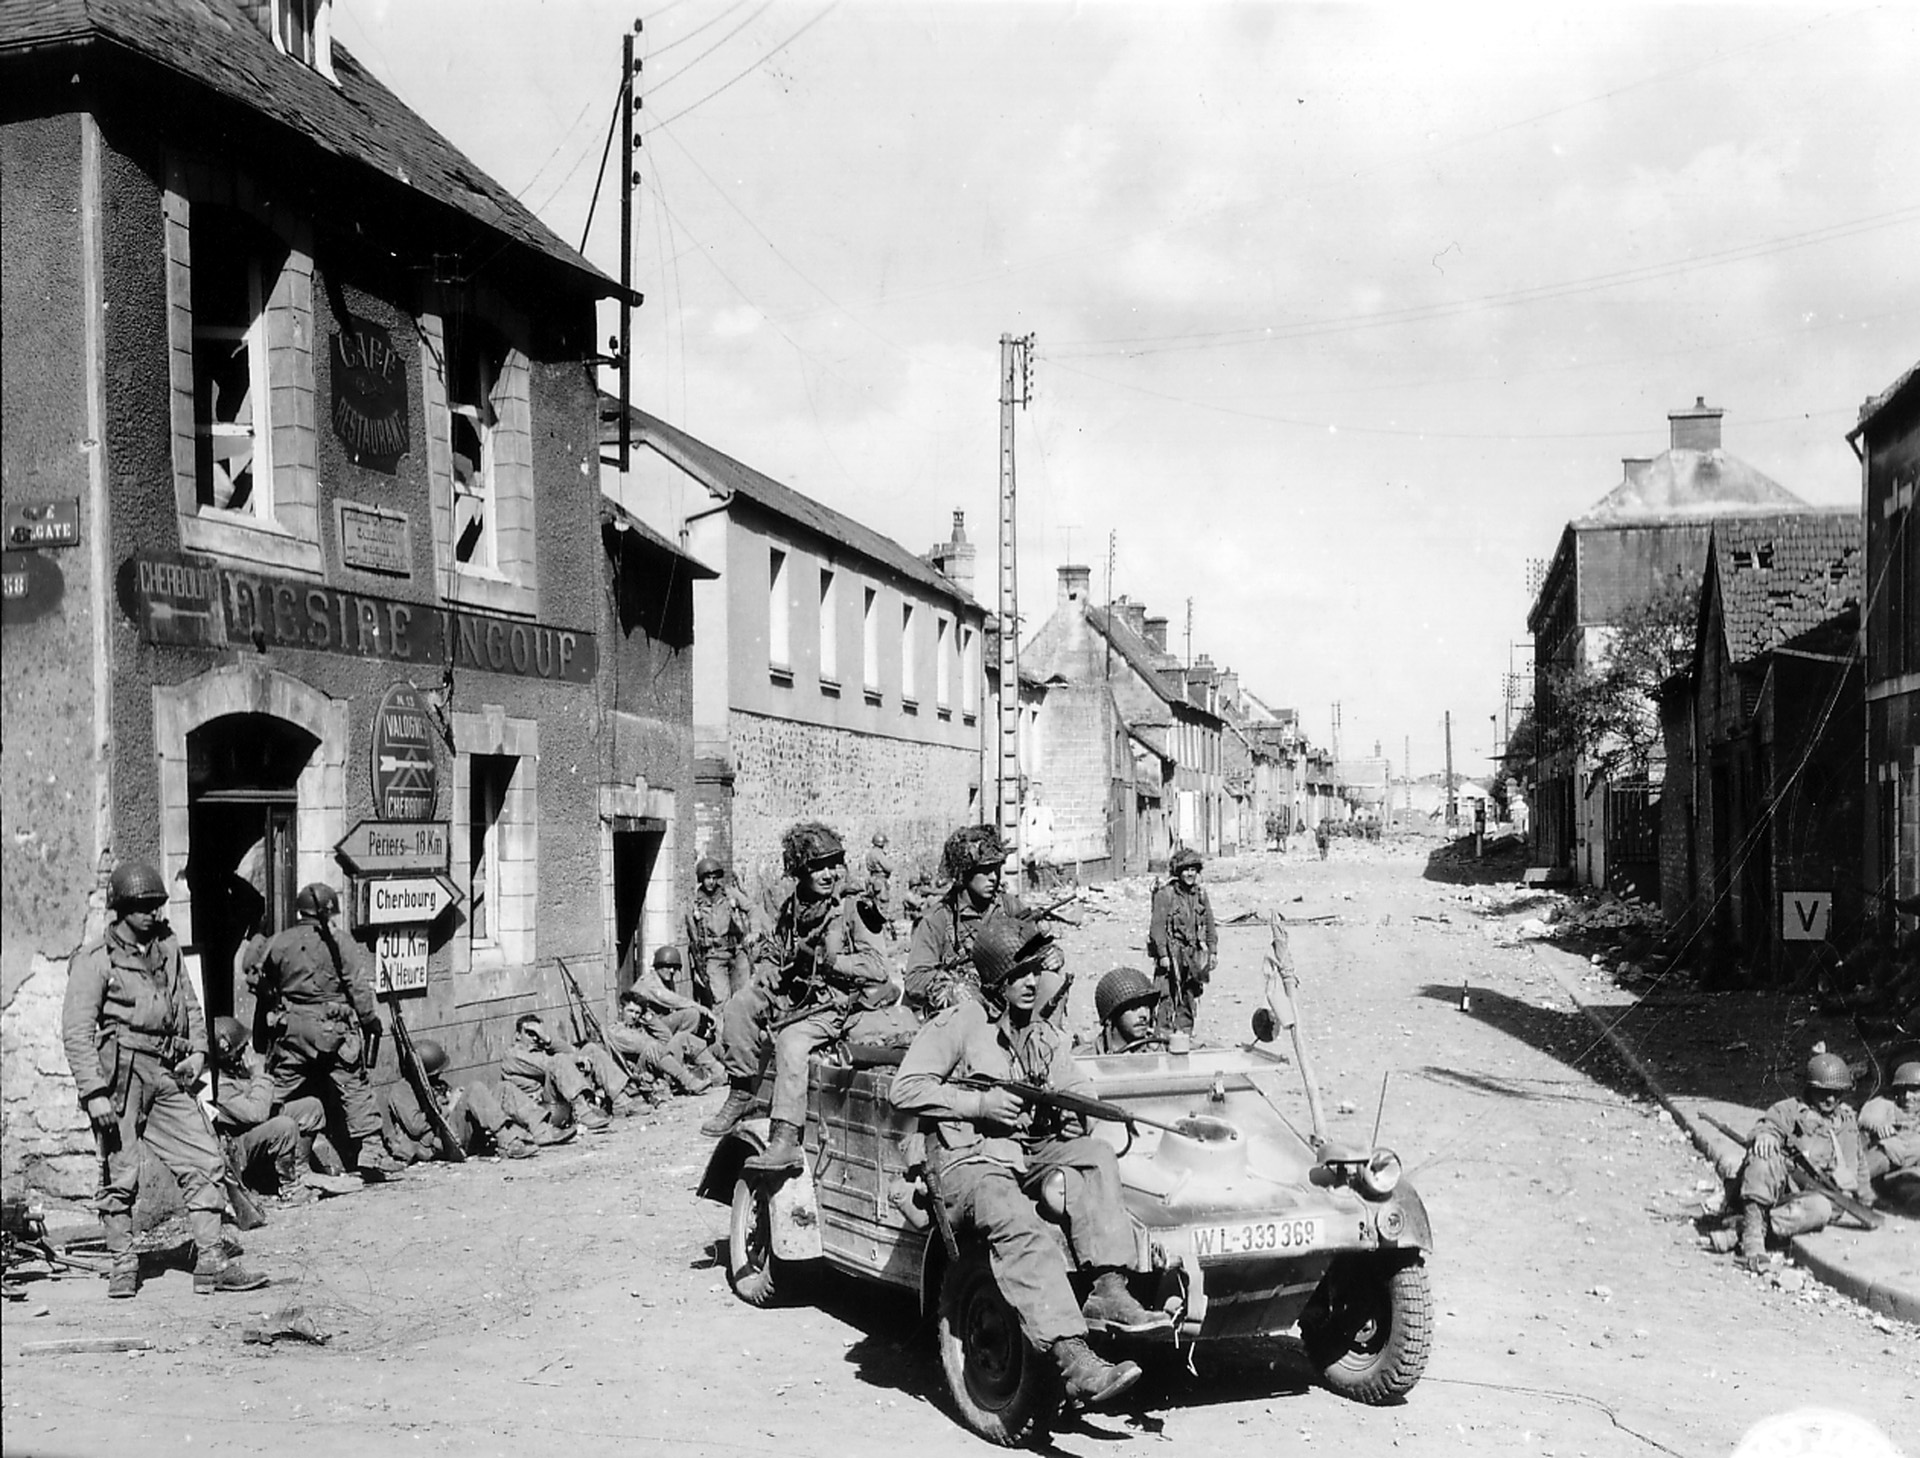 American paratroopers ride a captured Kubelwagen at the crossroads of the Rue Holgate and RN 13 in Carentan, June 12, 1944.